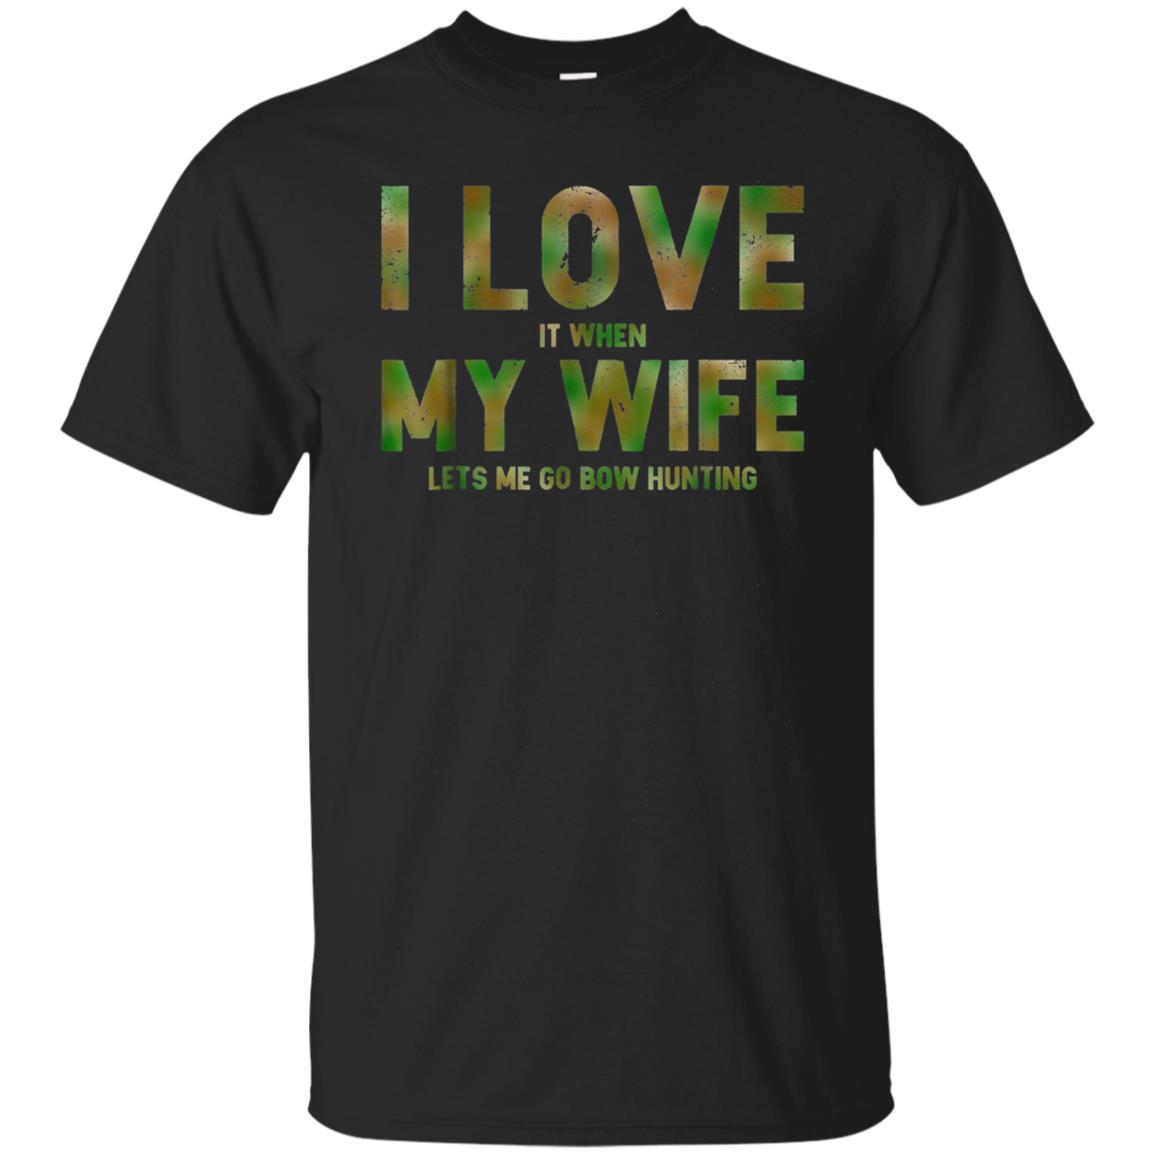 S I Love It When My Wife Lets Me Go Bow Hunting T Shirt (camo)